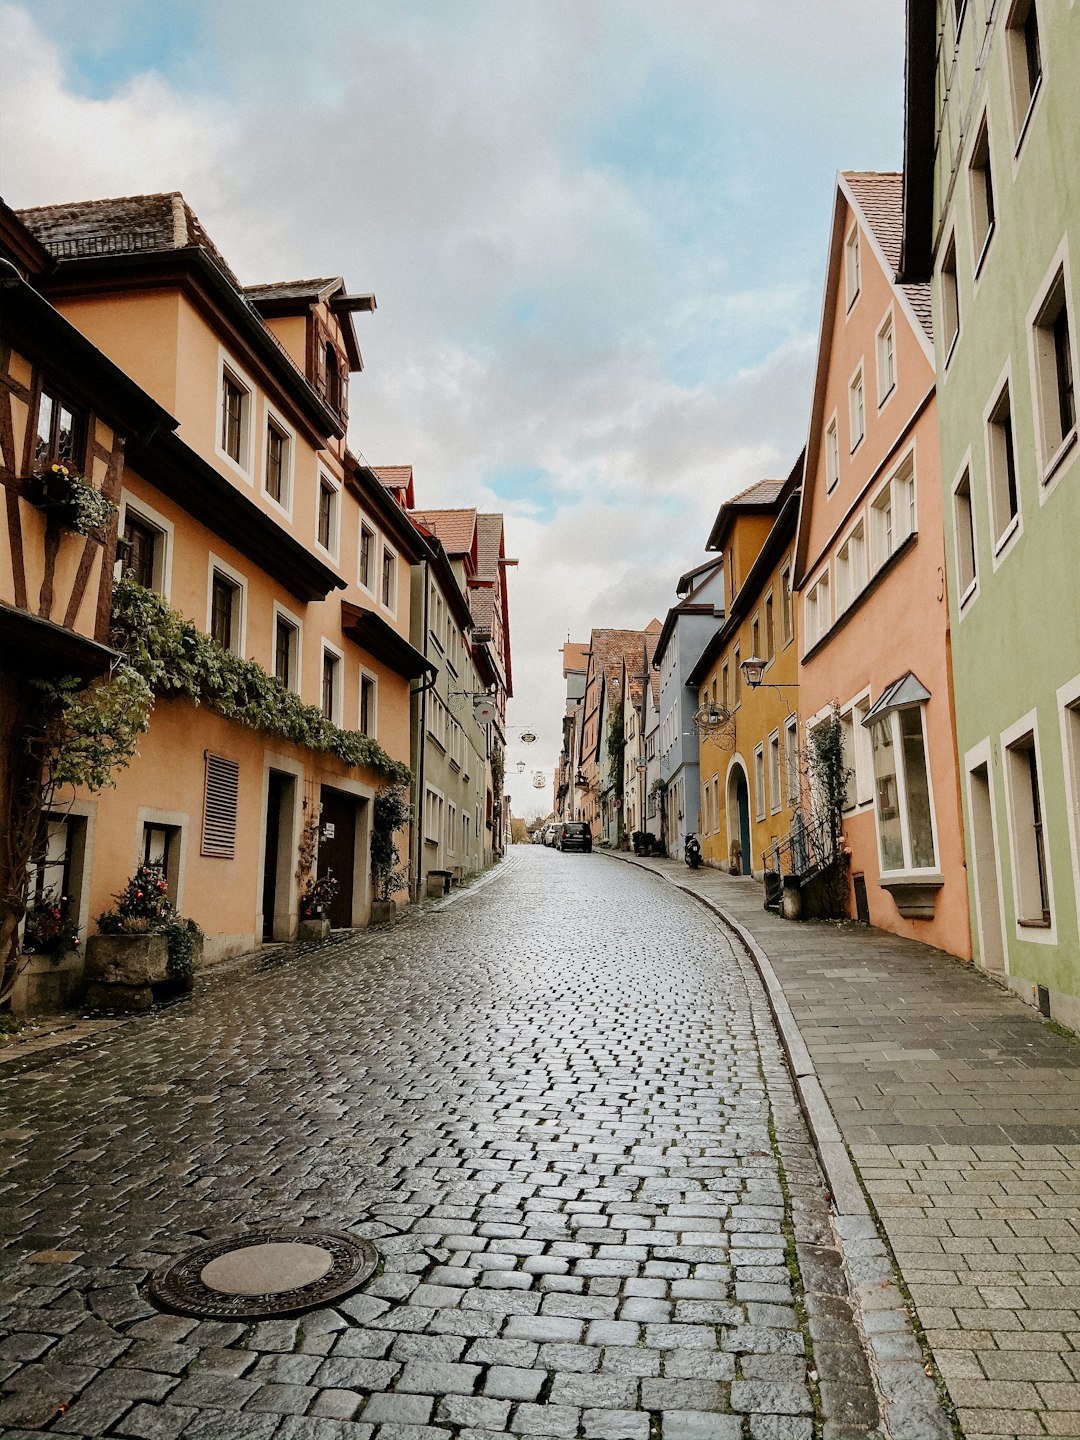 travelers stories about Town in Rothenburg ob der Tauber, Germany